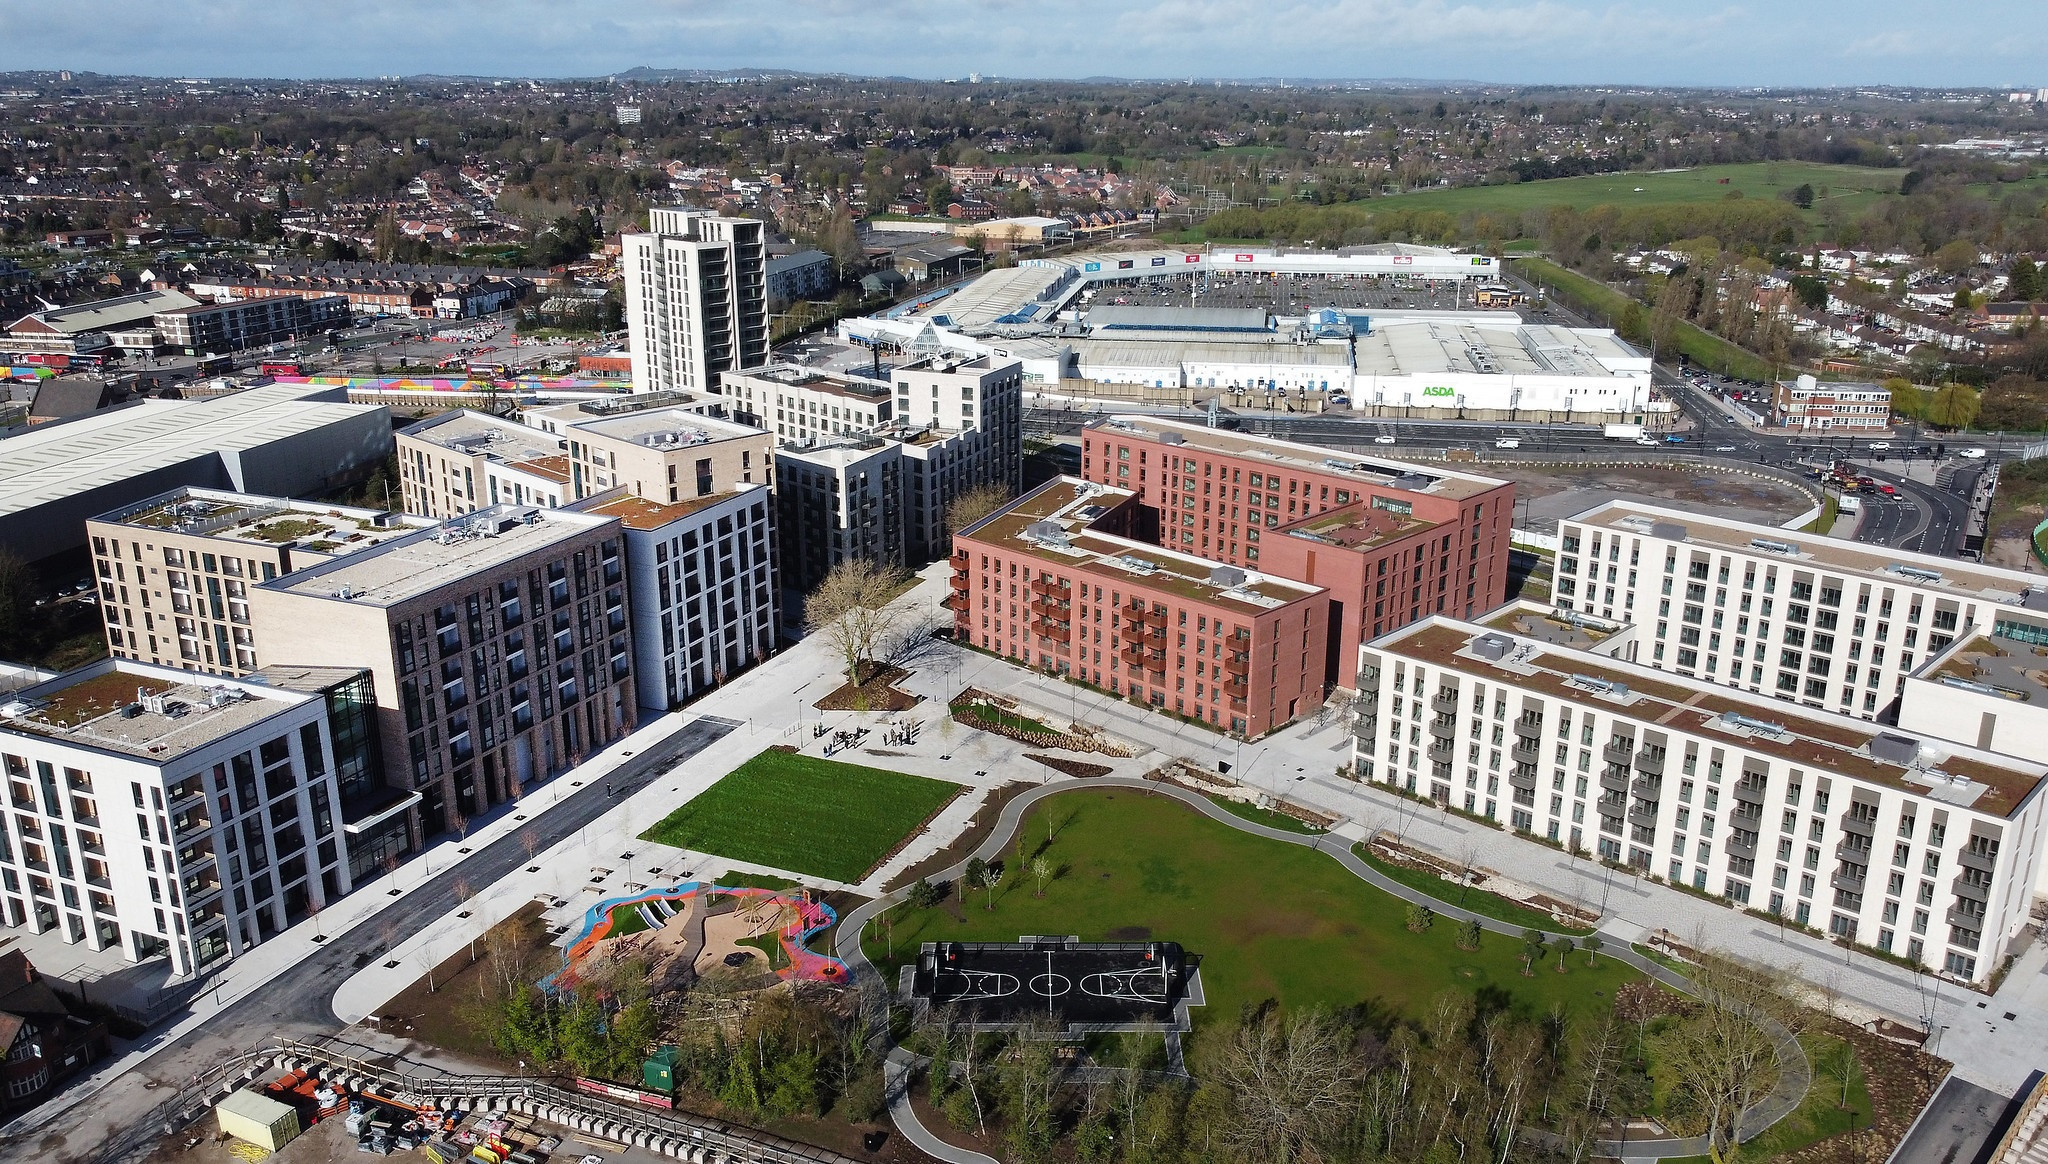 First phase of Perry Barr residential scheme completed as Birmingham 2022 legacy